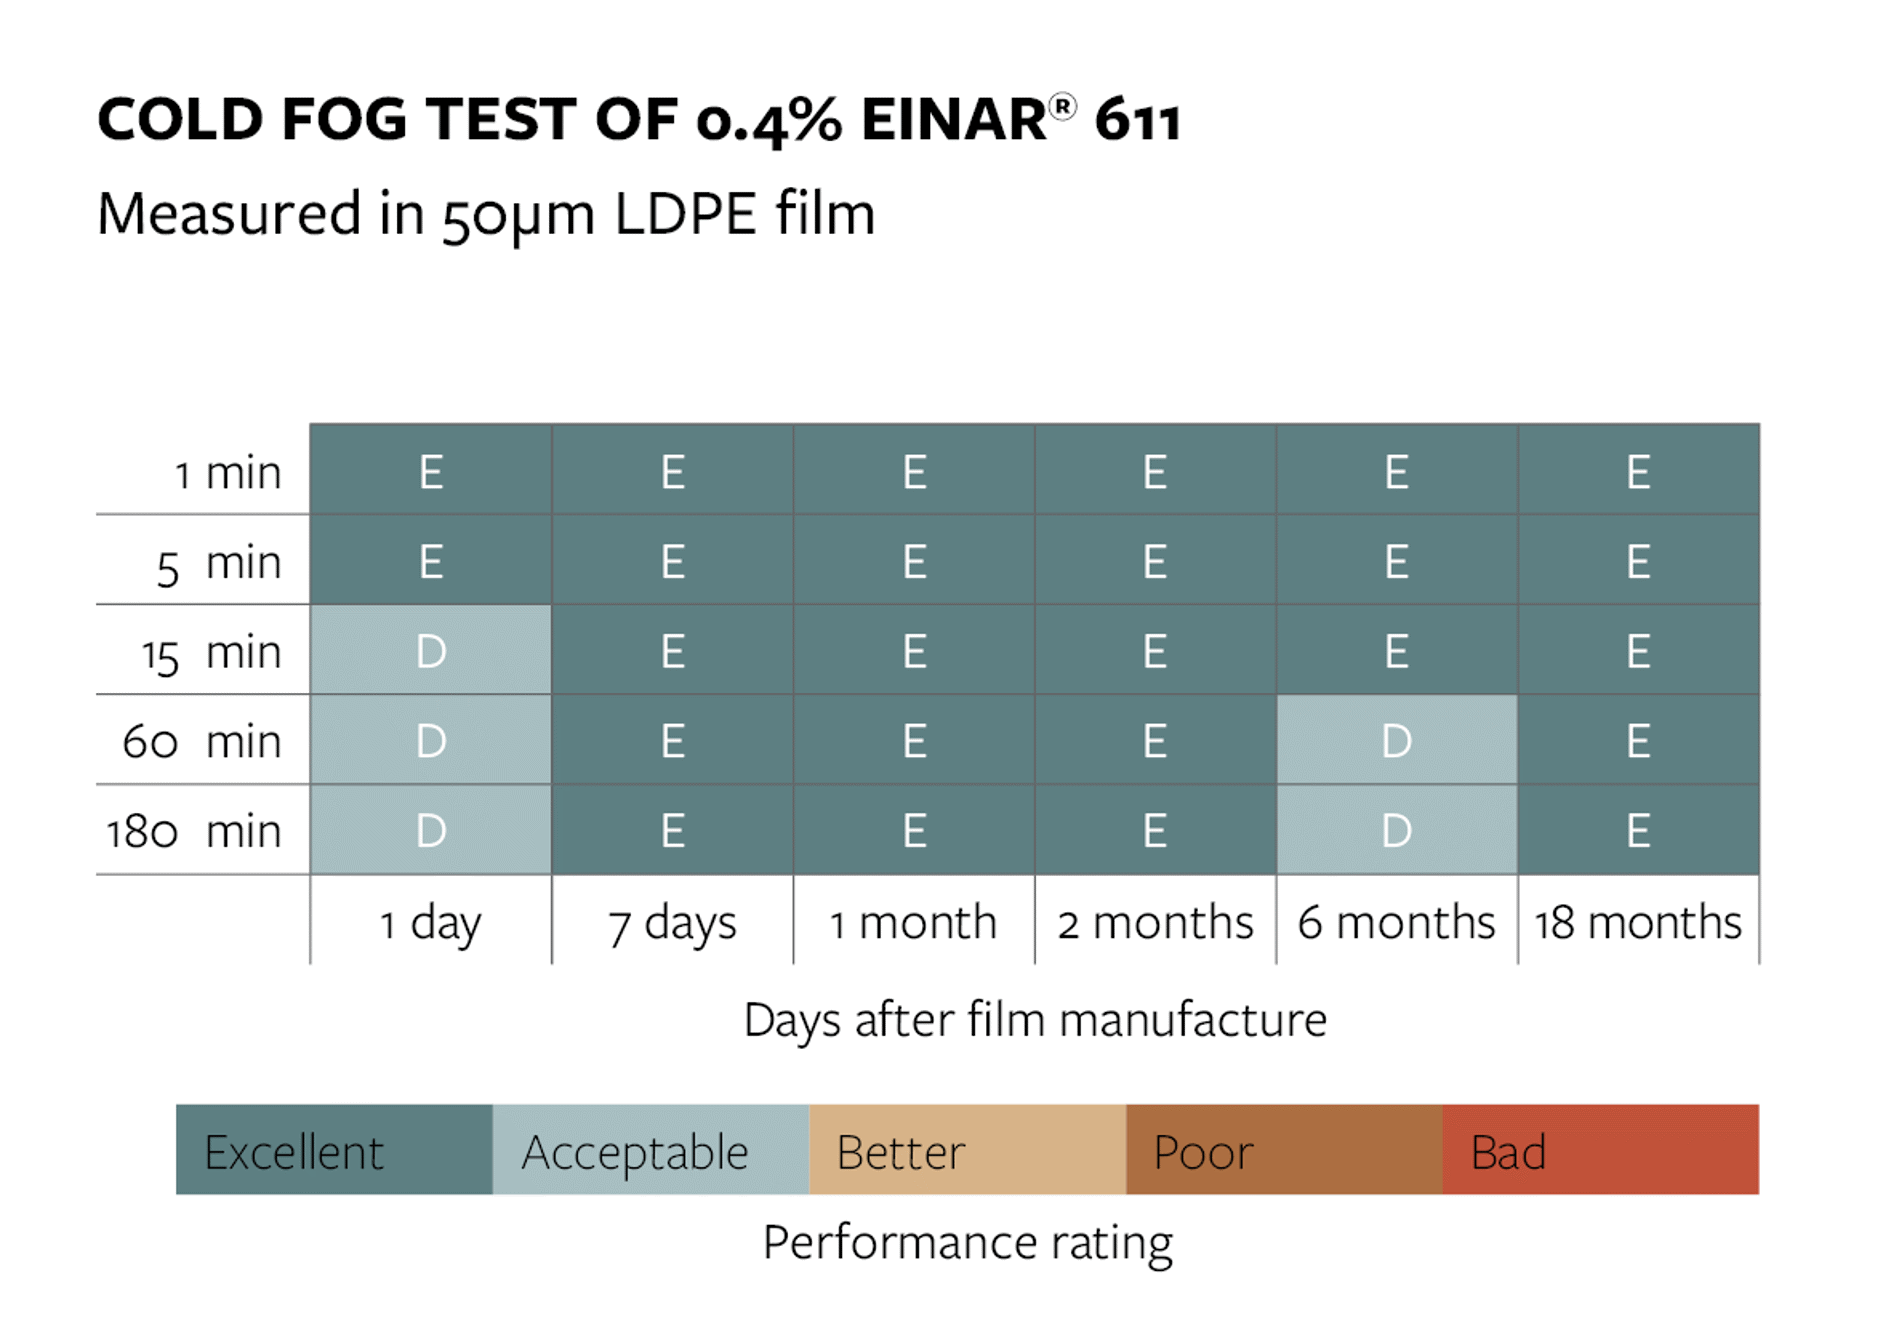 Einar® 611 shows outstanding cold-fog performance vs. non-vegetable glycerol esters in LDPE film.